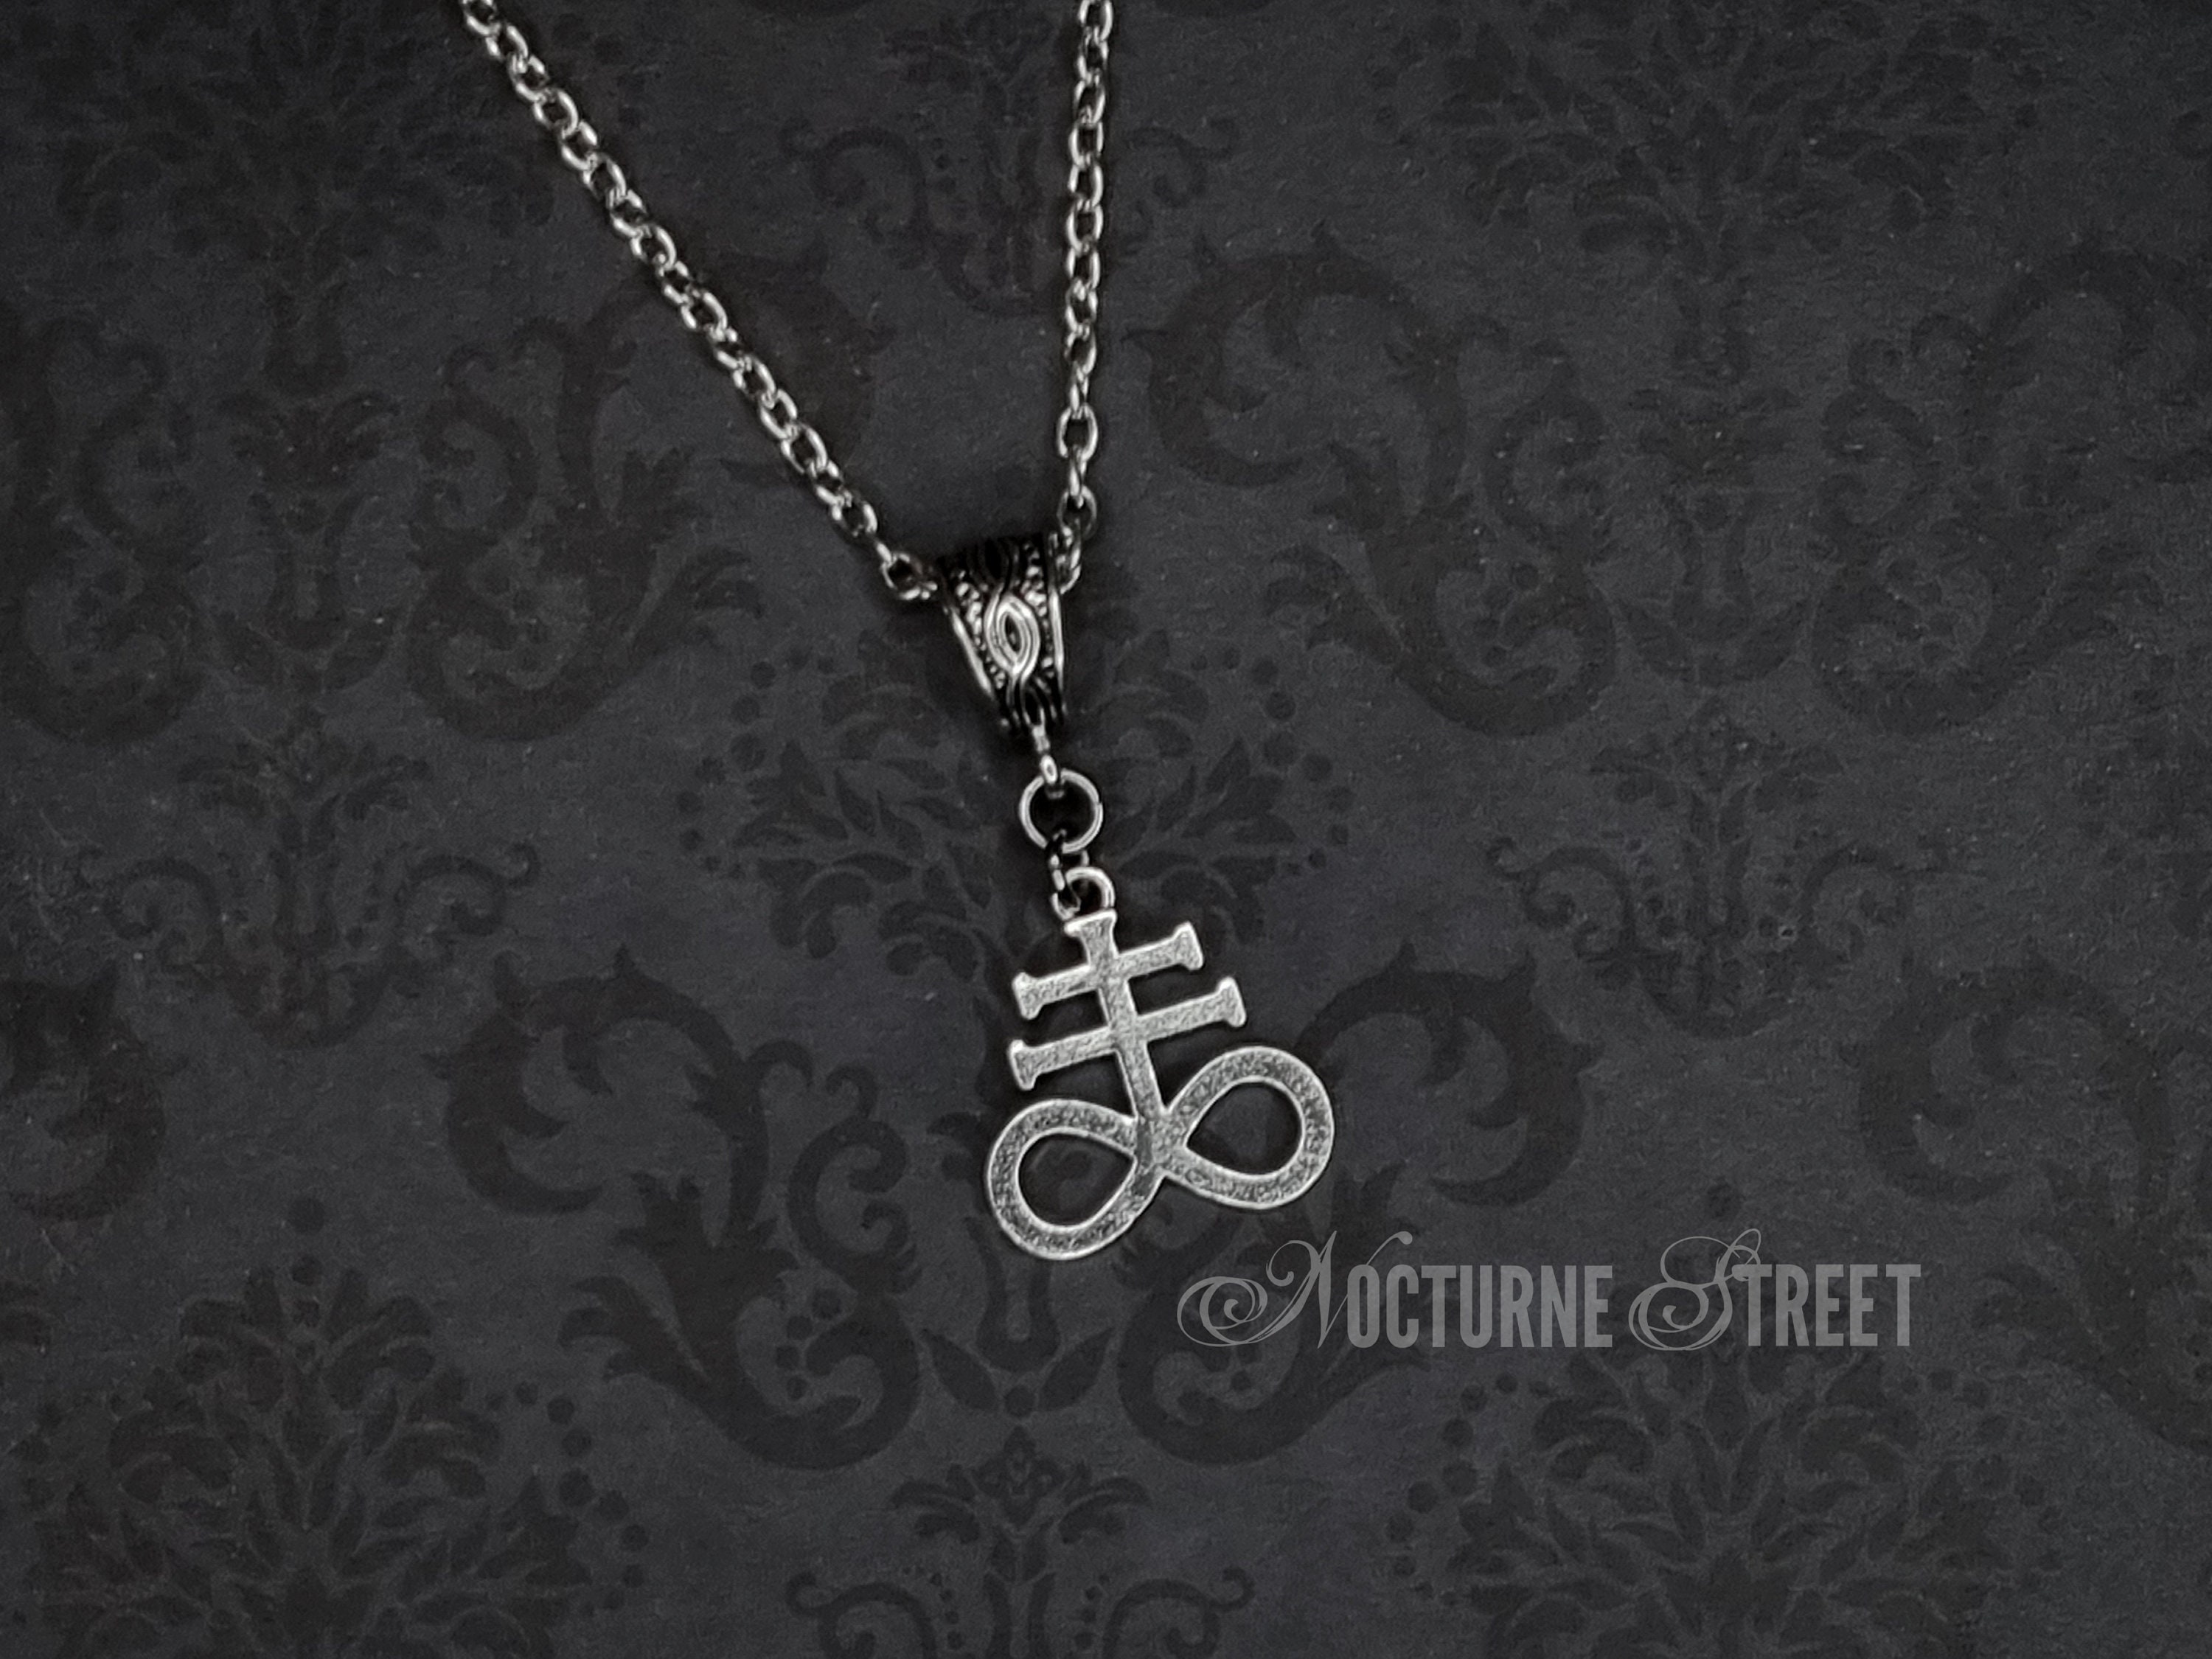 Frodete Upside Down Cross Necklace Victorian Ornate Cross Necklace Gothic  Satanic Jewelry Wealth Money Lucky Charm Safety Talisman Chain Necklace